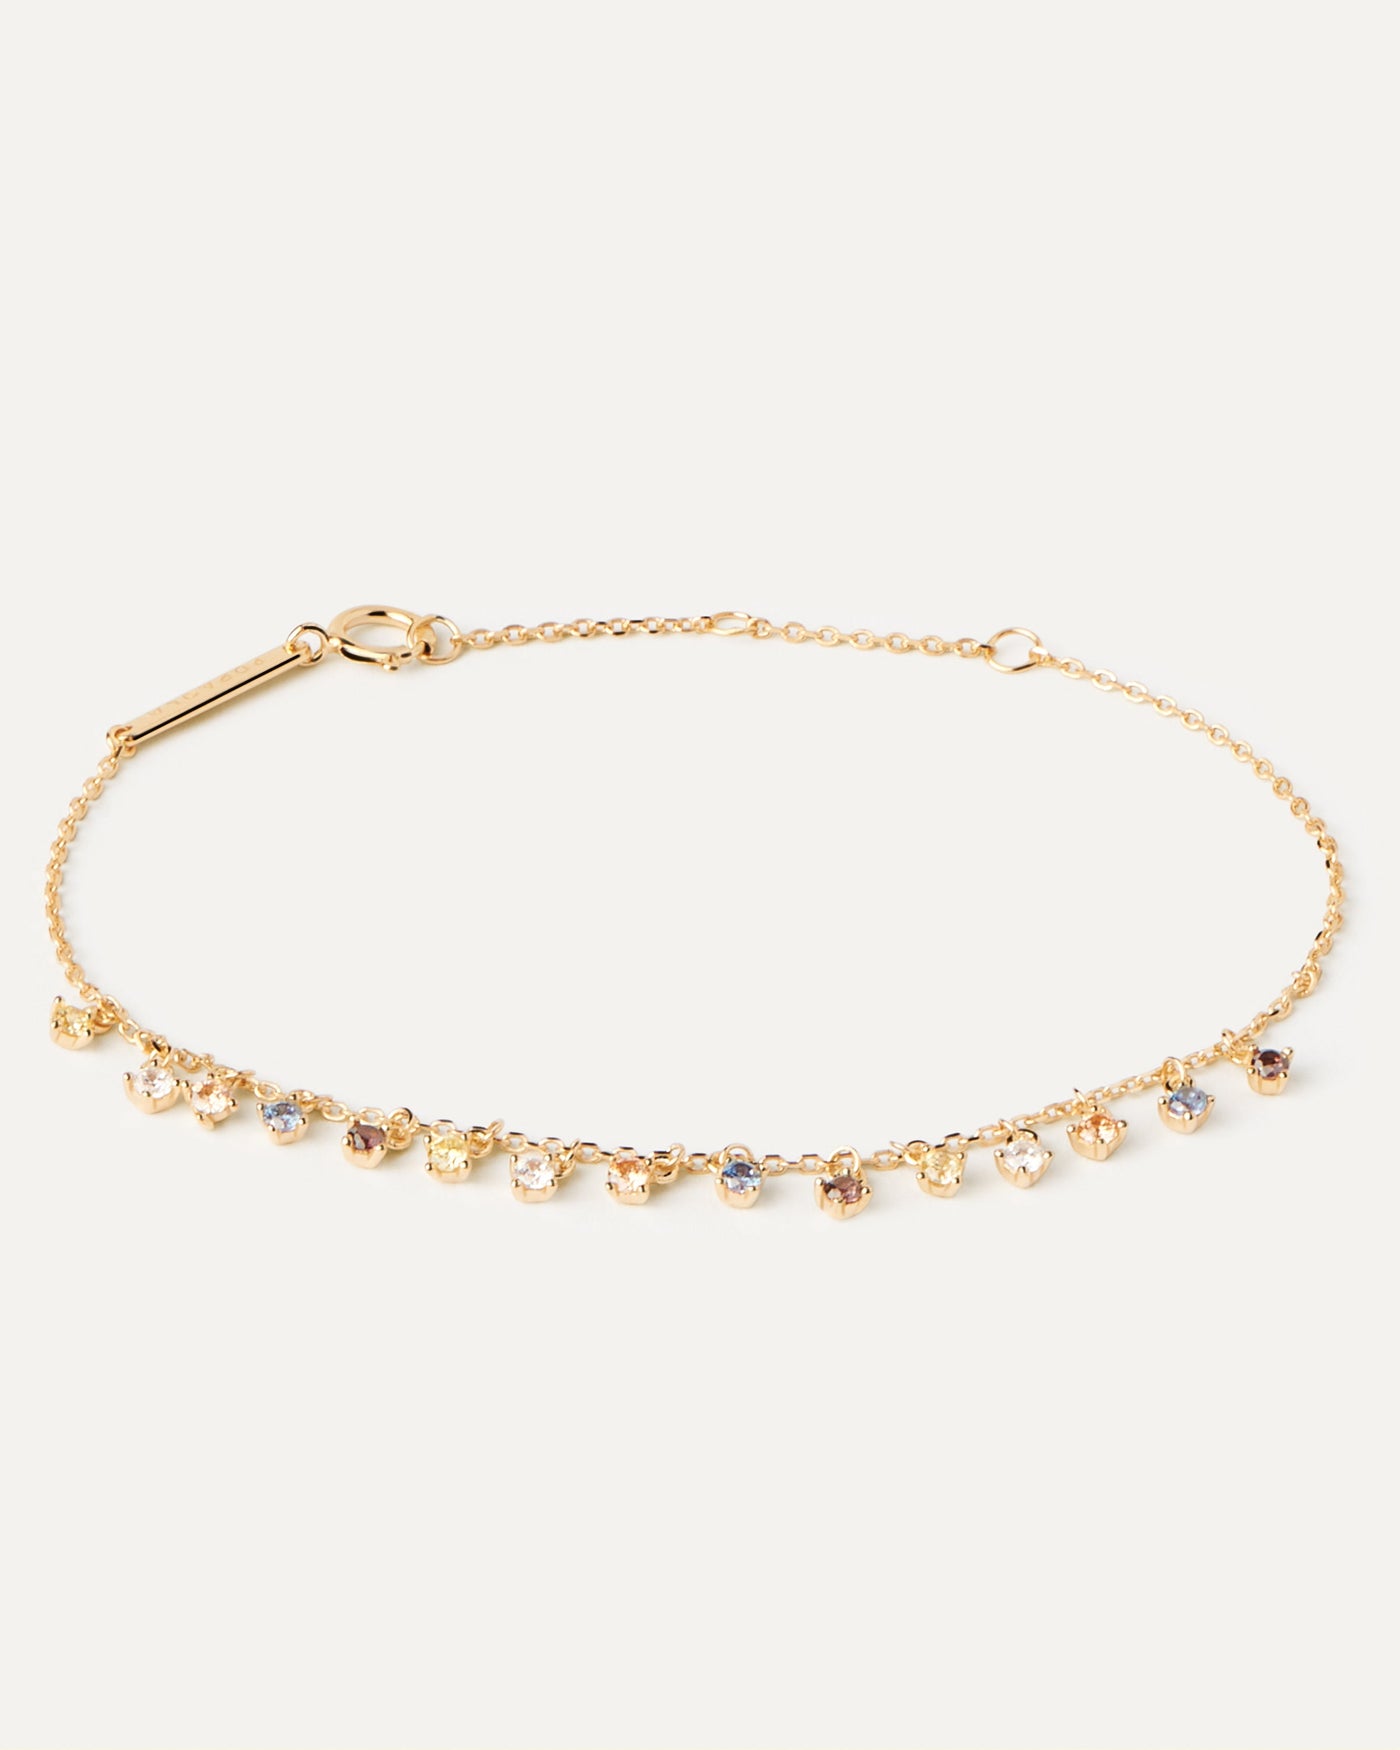 2024 Selection | Willow Bracelet. Gold-plated silver bracelet with 15 hanging stones of five different colors. Get the latest arrival from PDPAOLA. Place your order safely and get this Best Seller. Free Shipping.